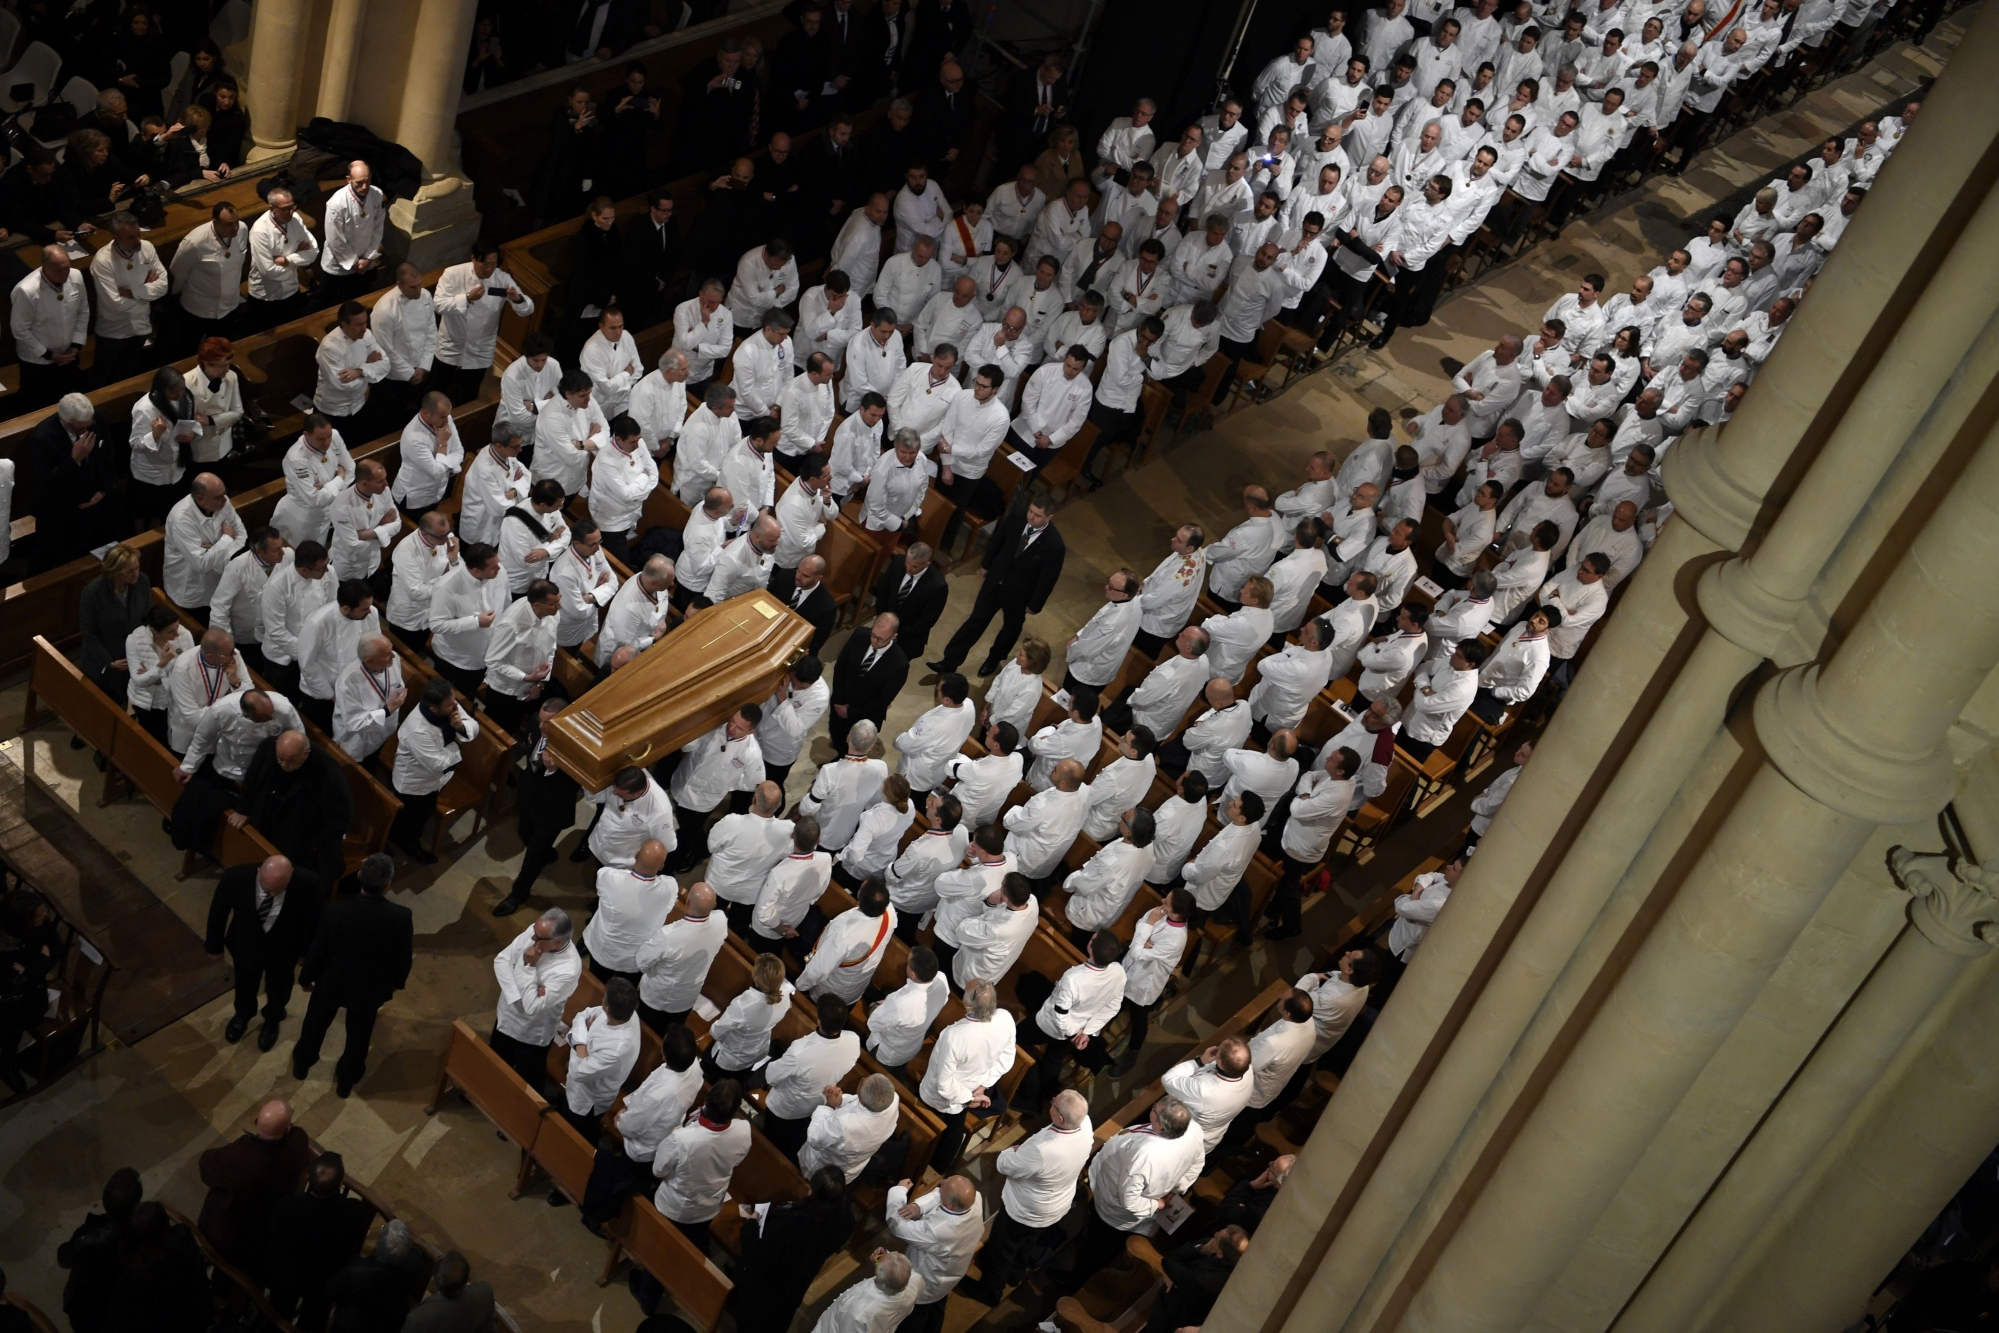 epa06475199 Chefs carry the coffin of French Paul Bocuse during the funeral ceremony at the Saint-Jean Cathedral in Lyon, France, 26 January 2018. More than 1,500 chefs from around the world along with thousands of fans of French cuisine are expected in Lyon to honor their "pope" Paul Bocuse, who died on 20 January 20 aged 91.  EPA/PHILIPPE DESMAZES / POOL MAXPPP OUT FRANCE GASTRONOMY BOCUSE FUNERAL